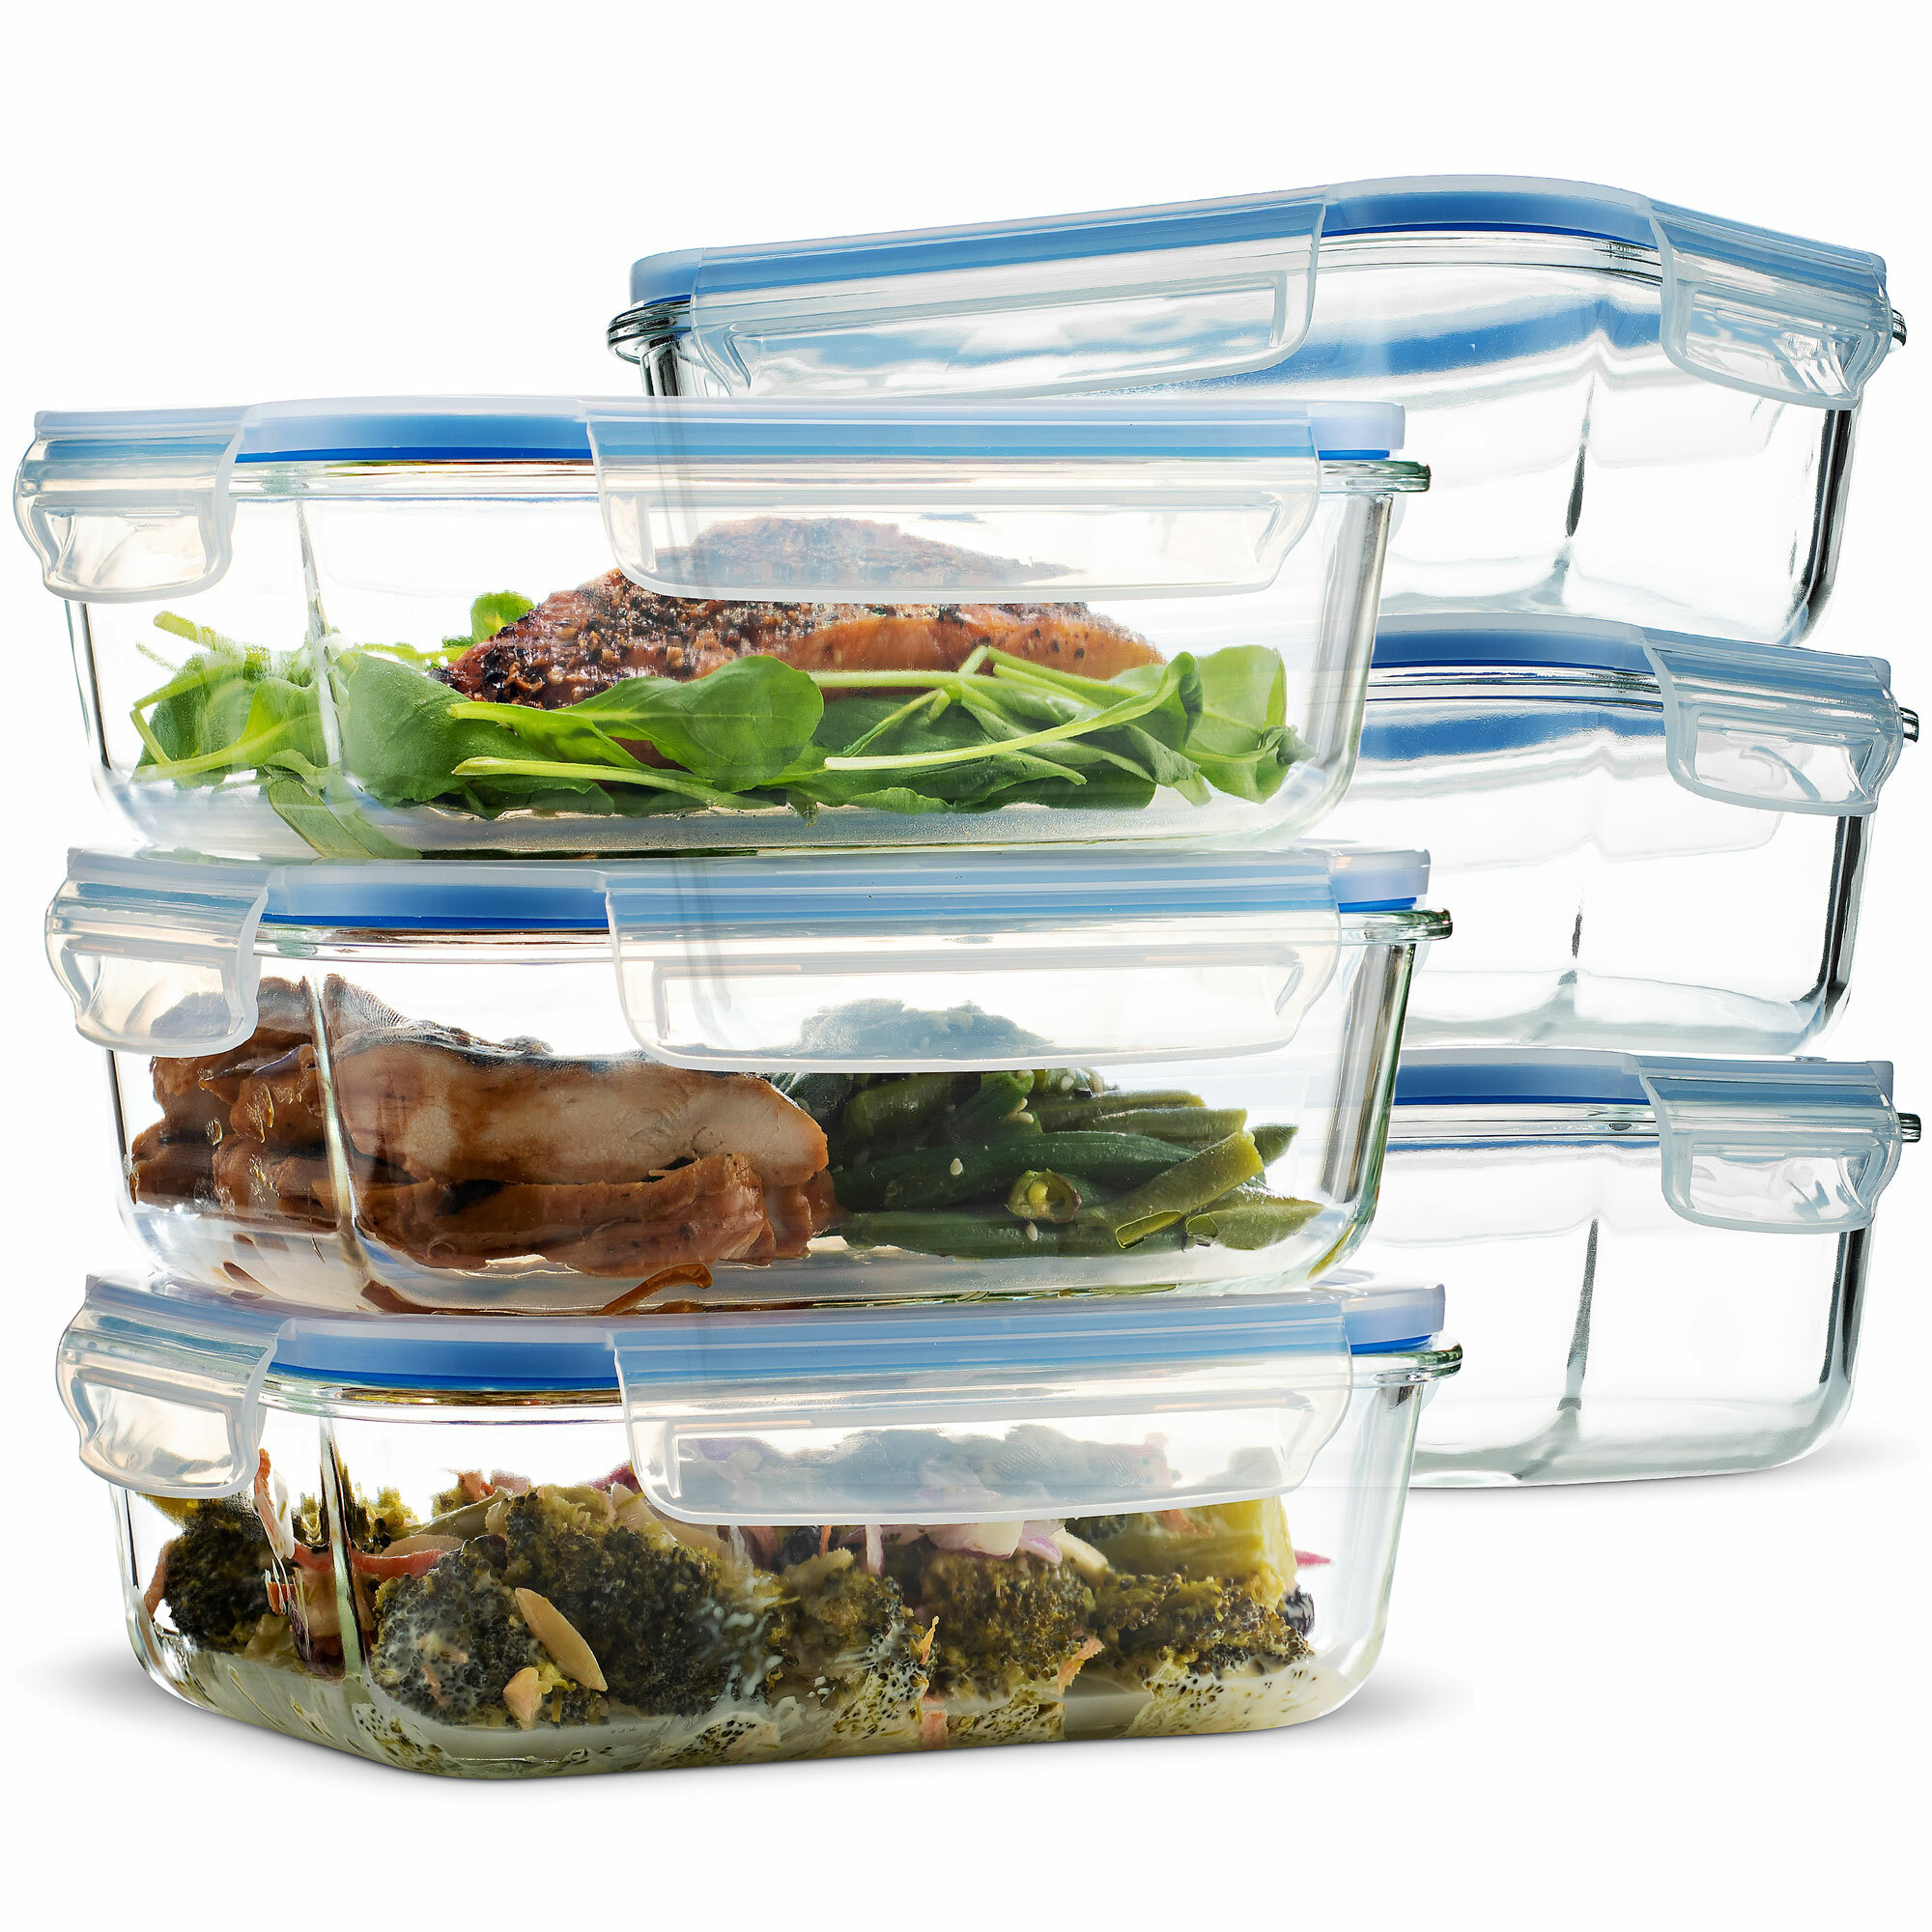 Rebrilliant Lana Glass Food Storage Container - Set of 6 & Reviews